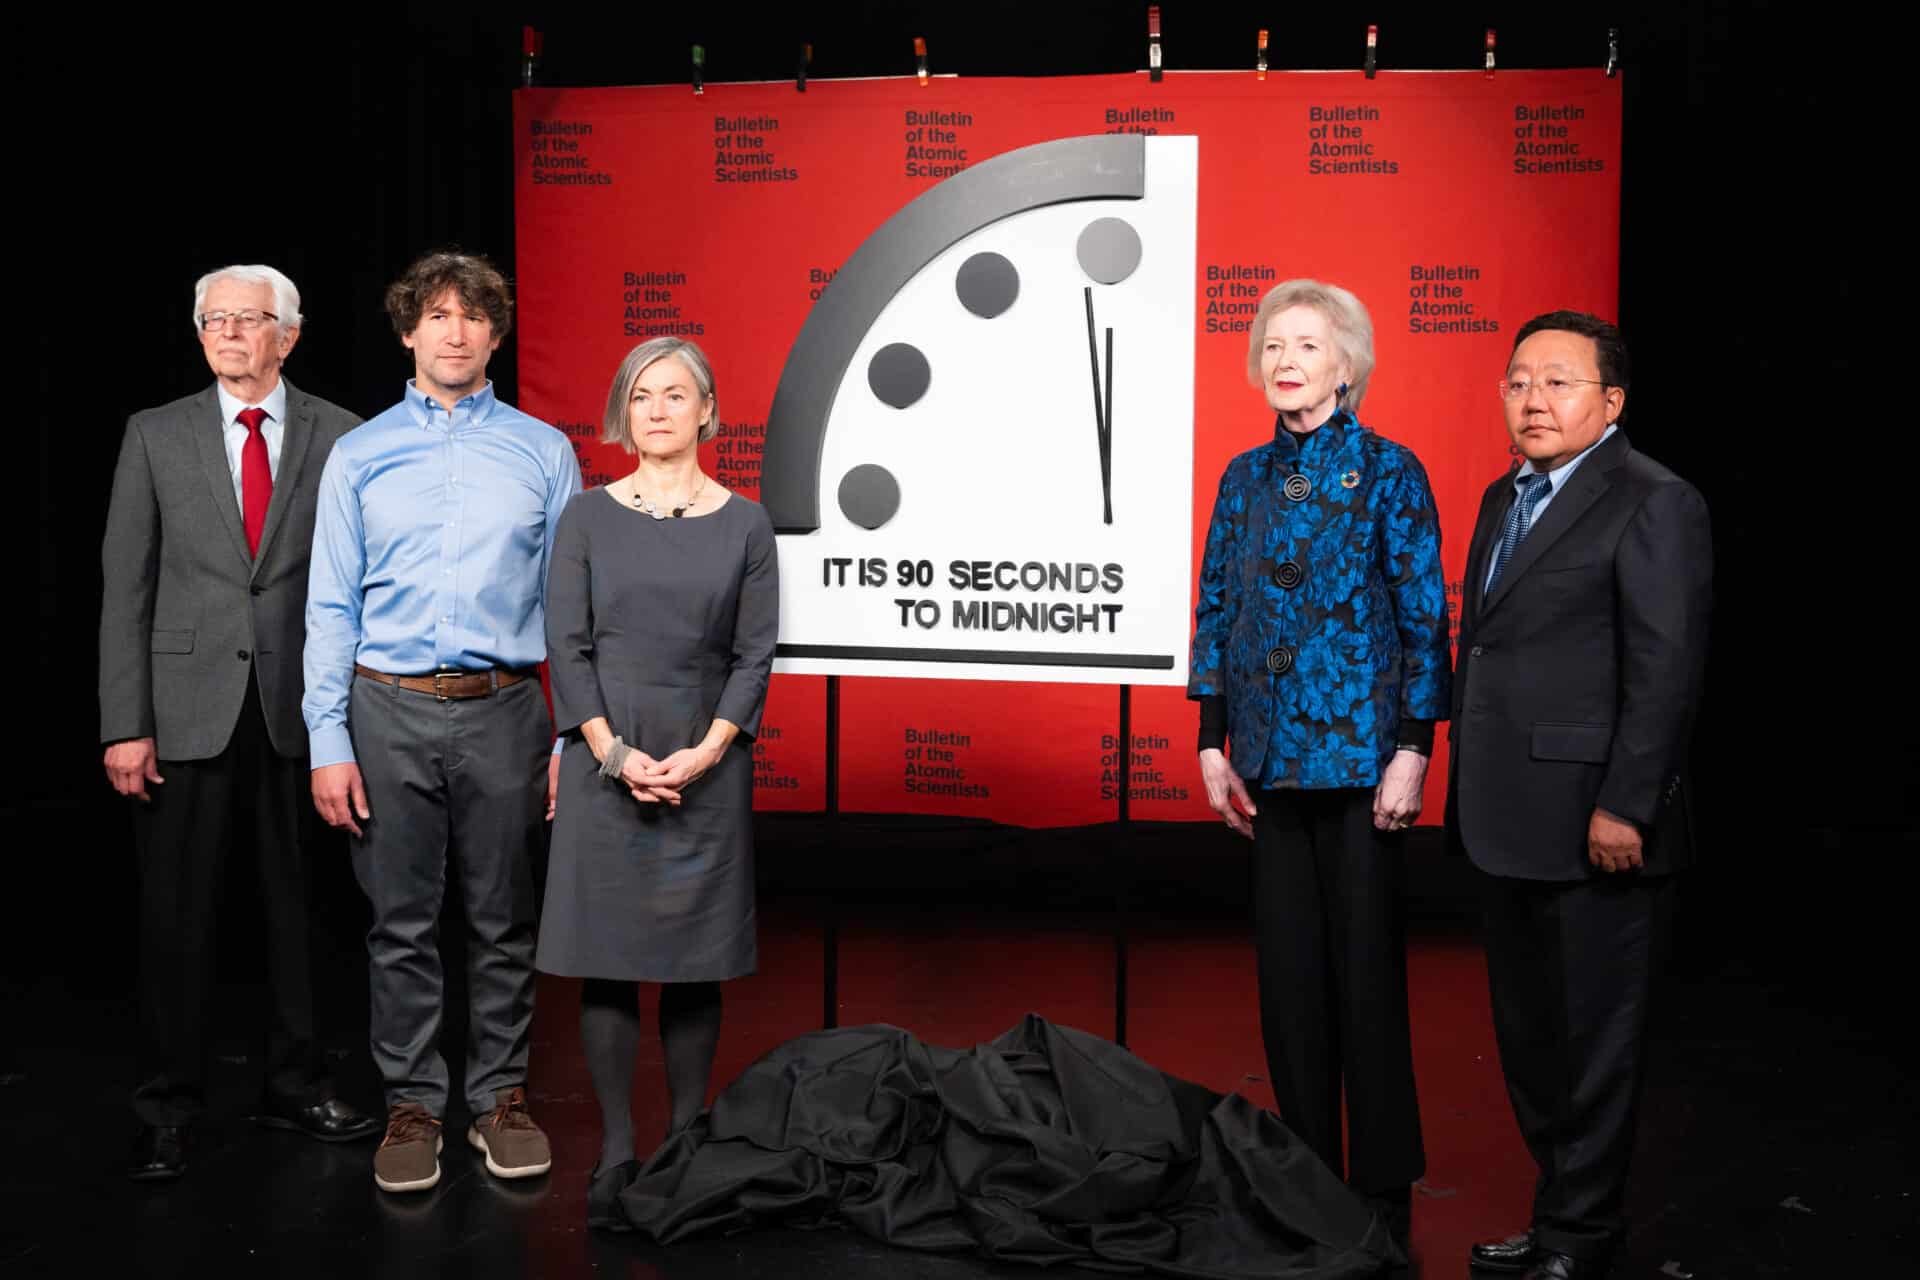 The Doomsday Clock is many things all at once: It’s a metaphor, it’s a logo, it’s a brand, and it’s one of the most recognizable symbols in th